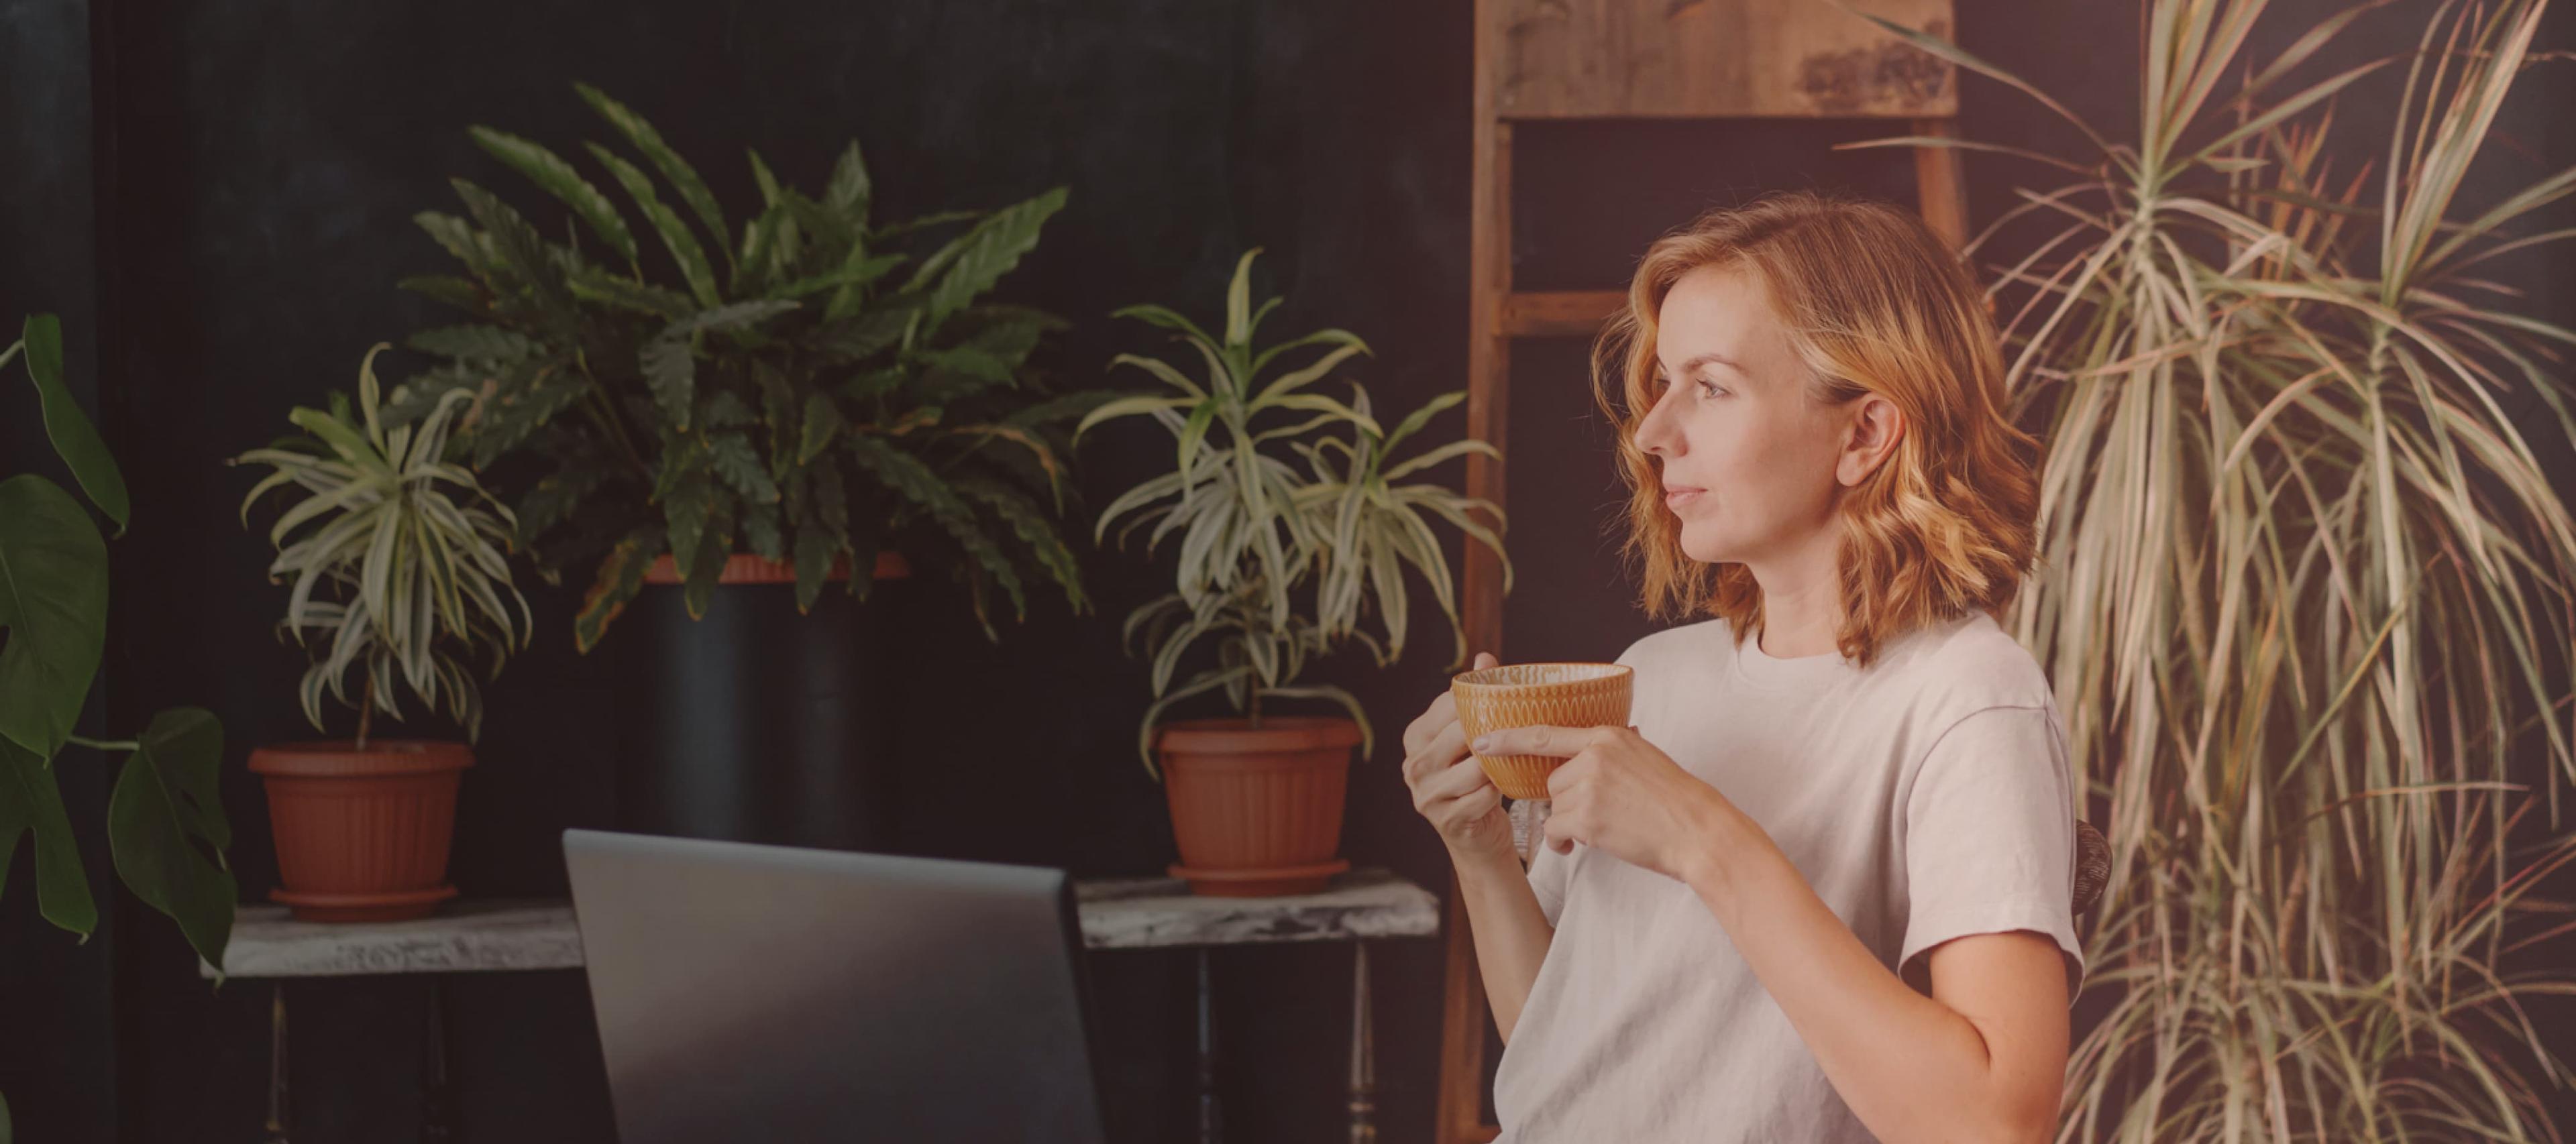 A woman drinks coffee in front of a laptop